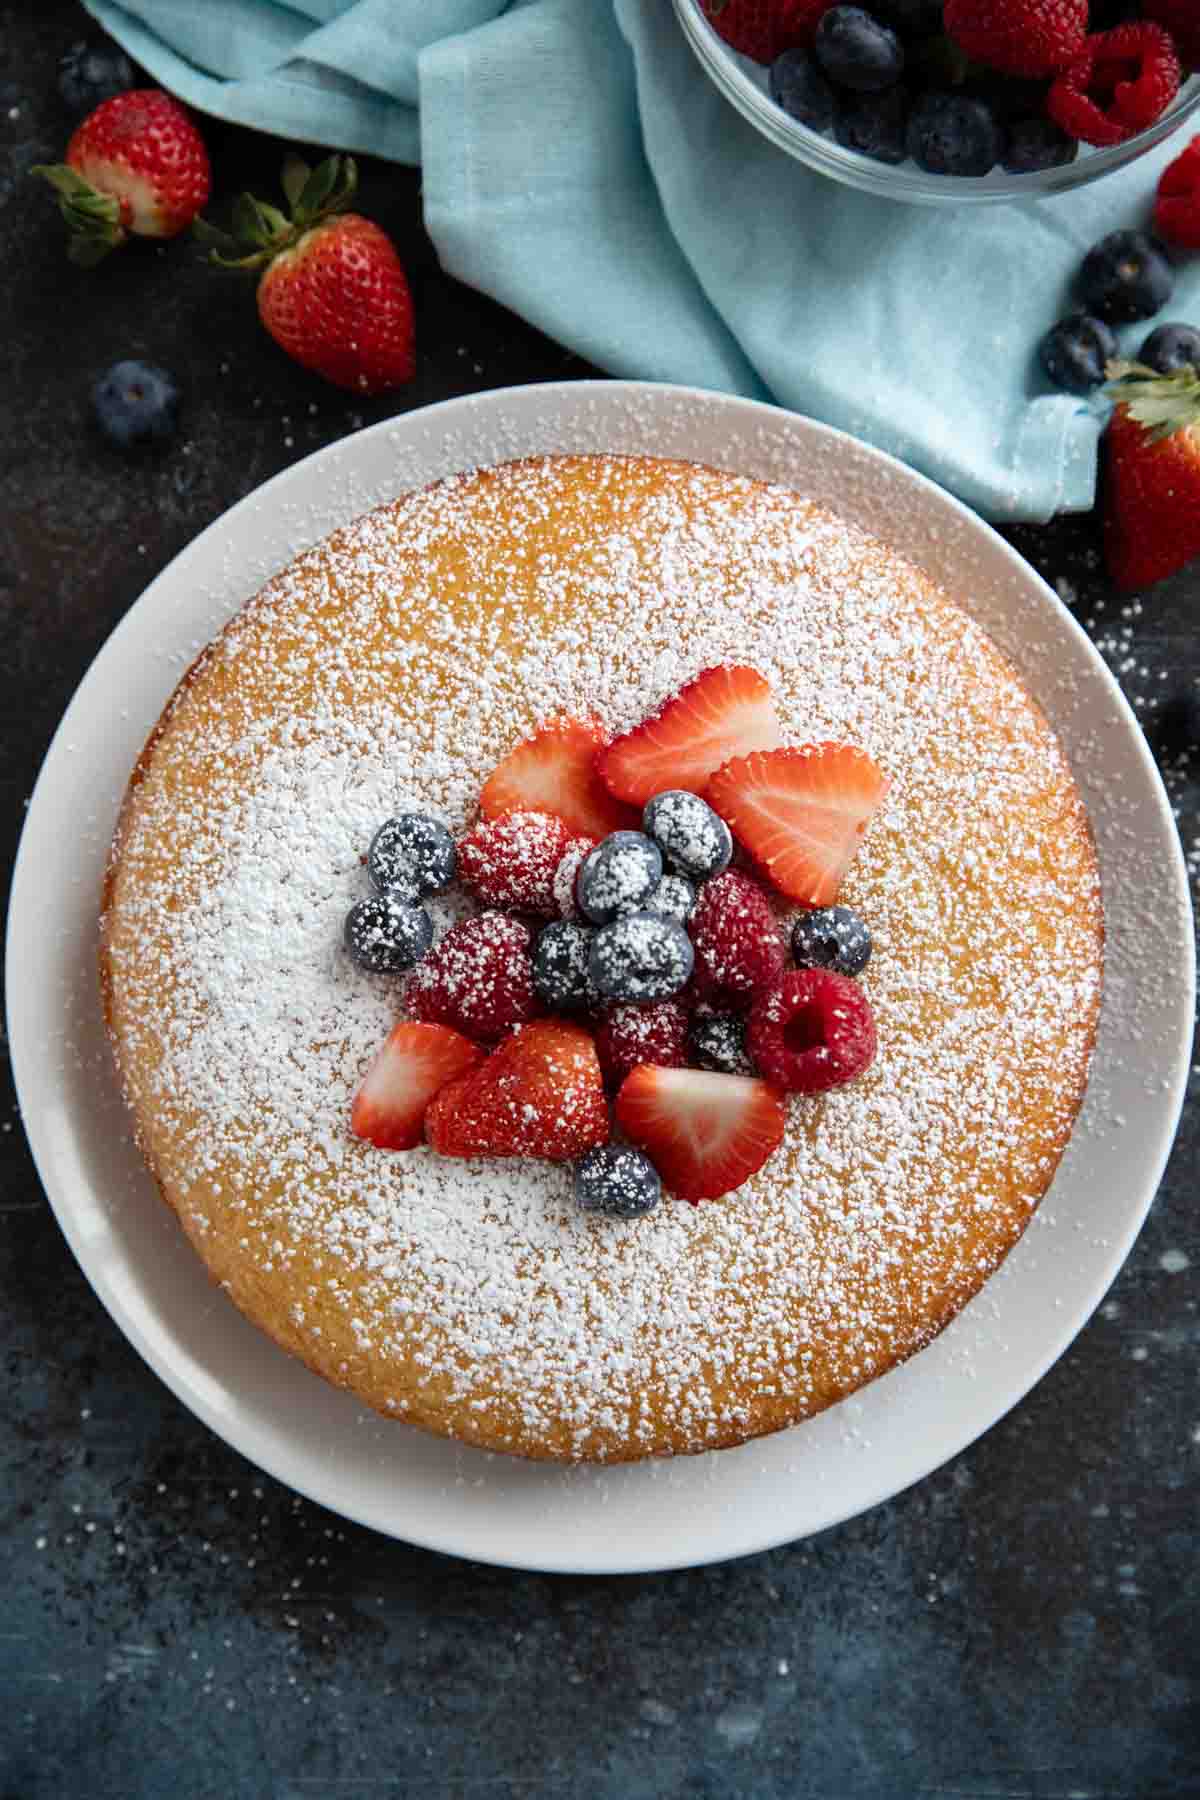 Lemon yogurt cake on a plate, sprinkled with powdered sugar and topped with berries.